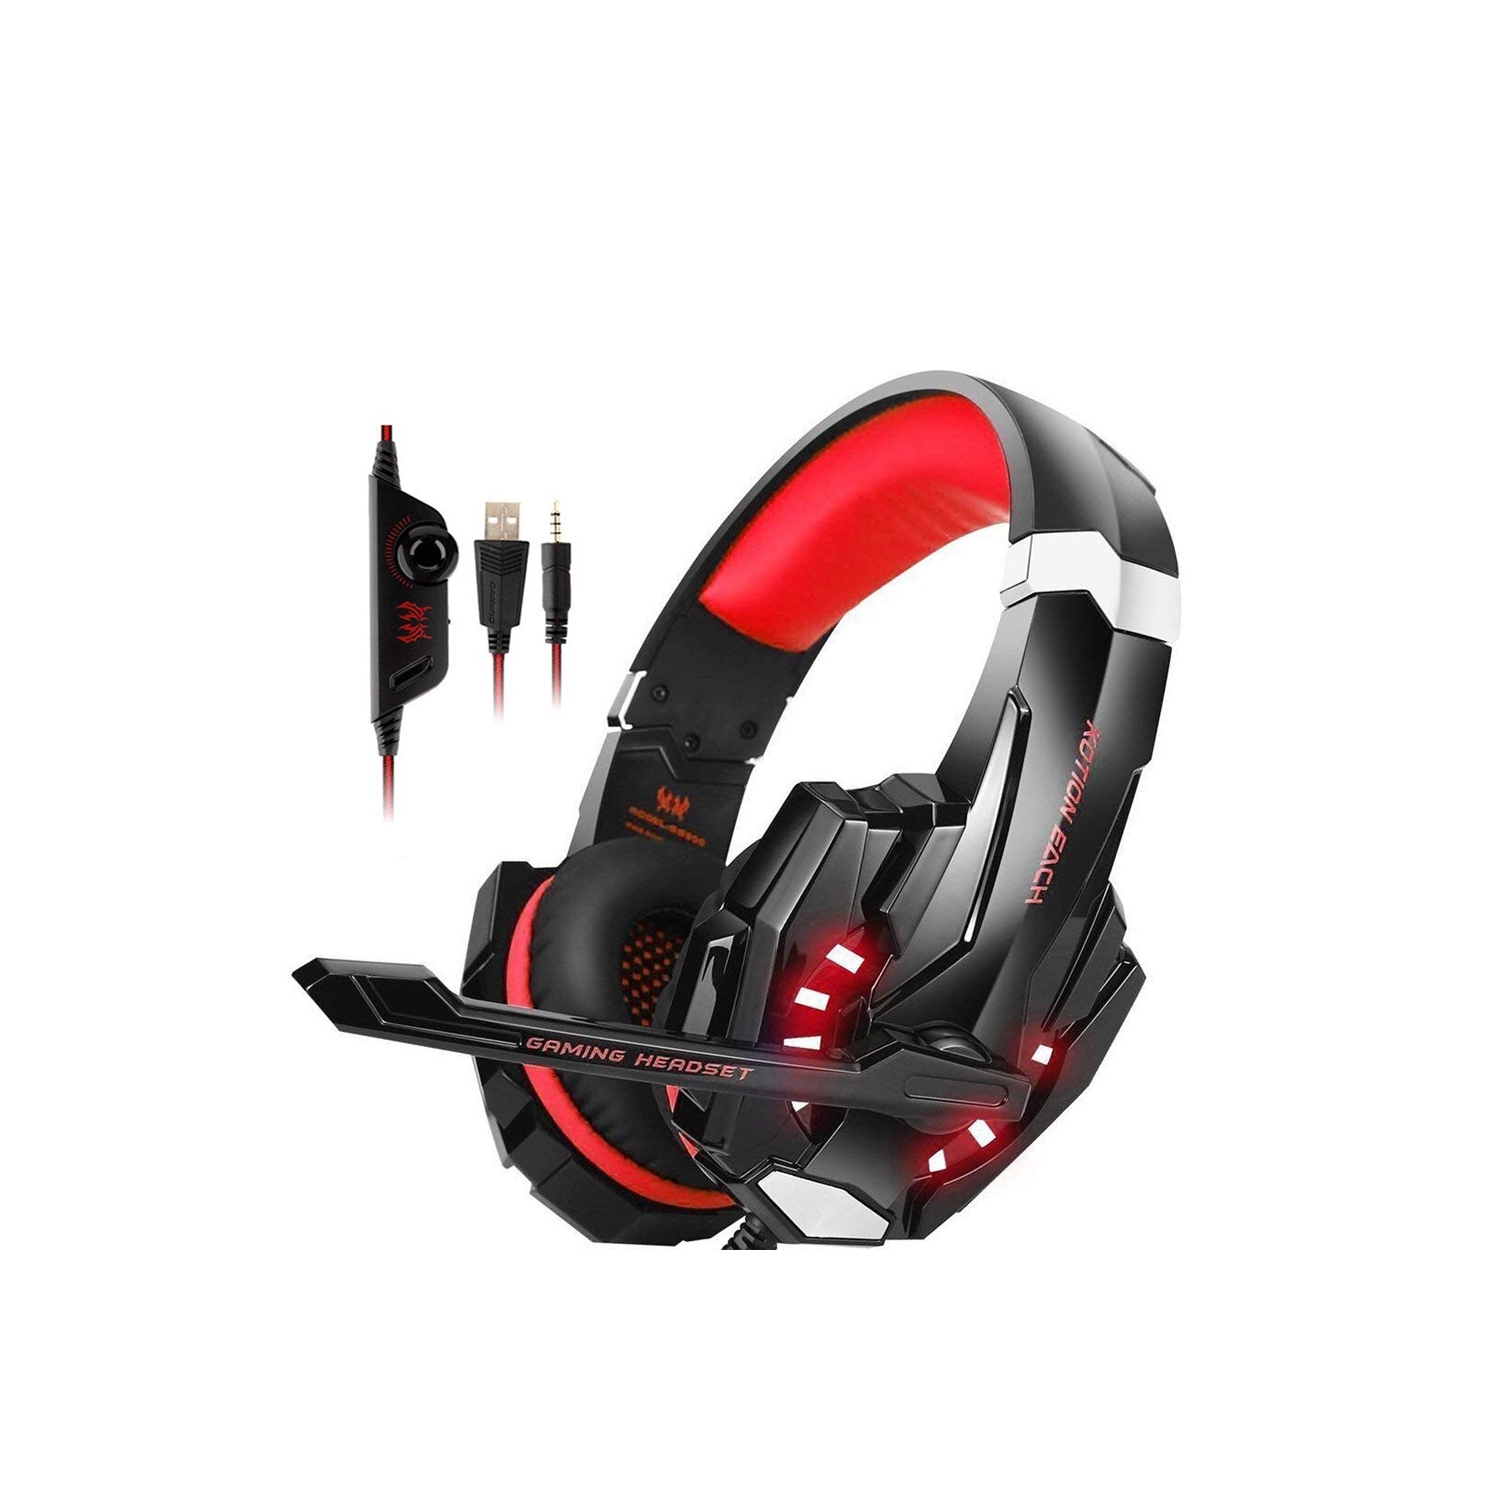 G9000 LED Light 3.5mm Gaming Headphone Headset Earphone Headband With Microphone For Desktop Laptop Tablet Mobile - Red